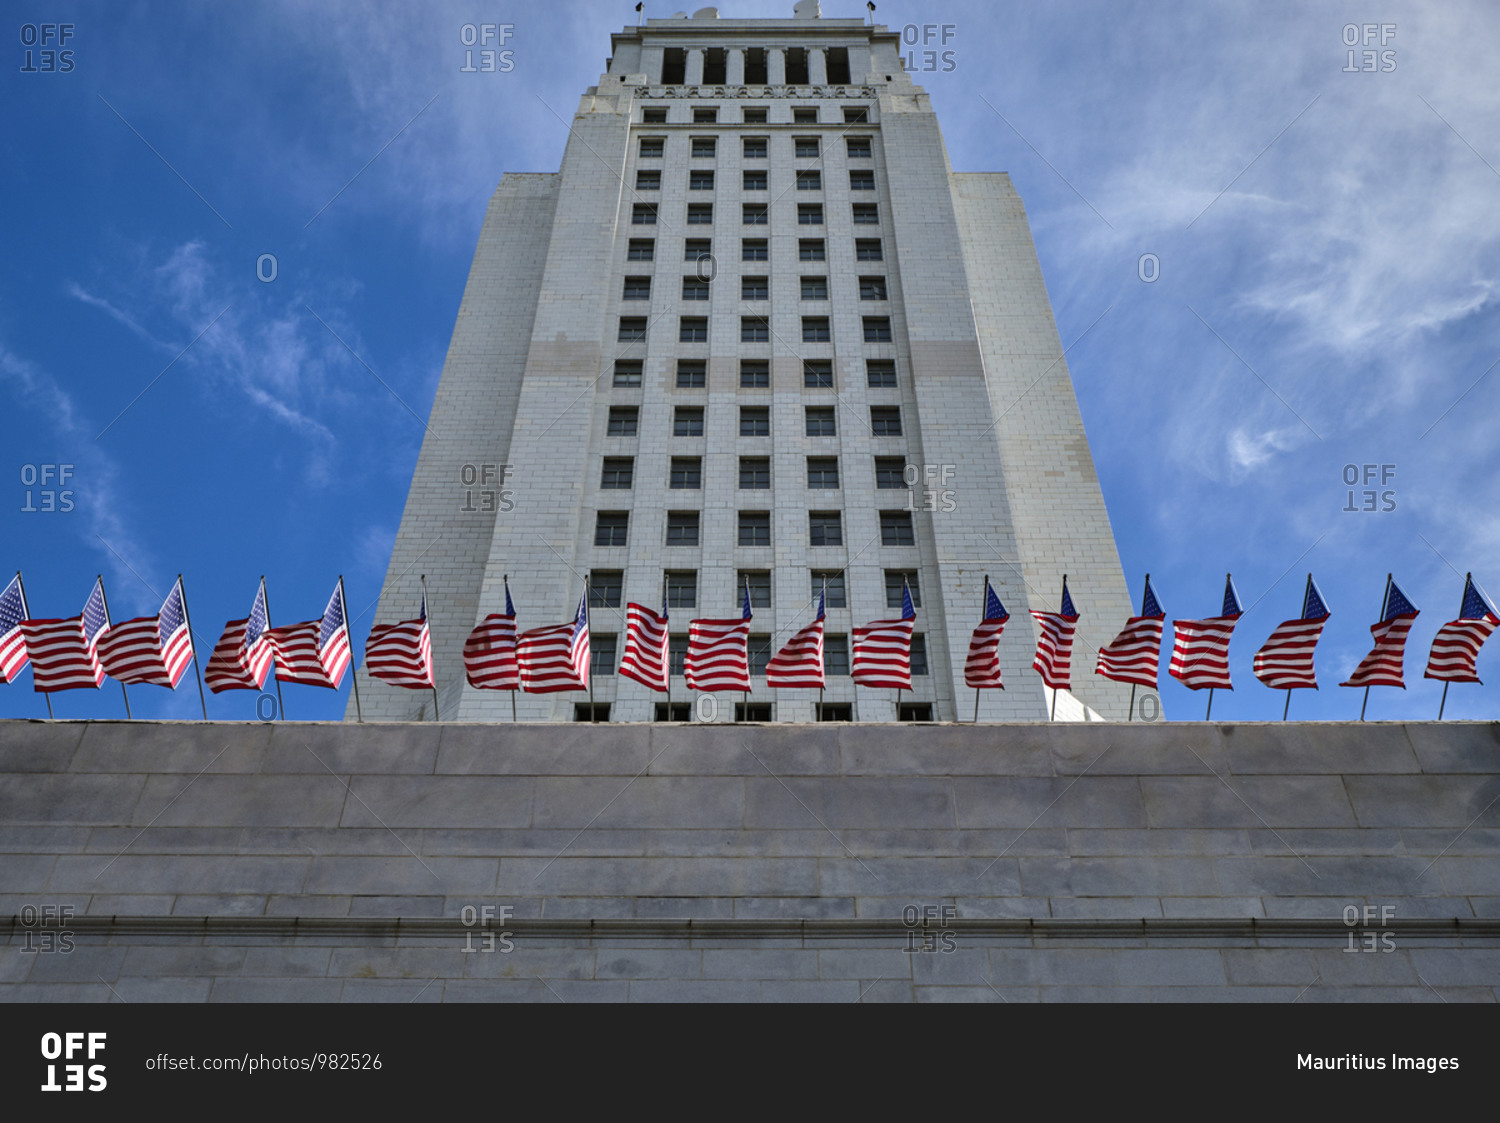 USA, United States of America, California, Los Angeles, Downtown, Chinatown, CBD, Central Business District, Superior Court, Court house, american flags,